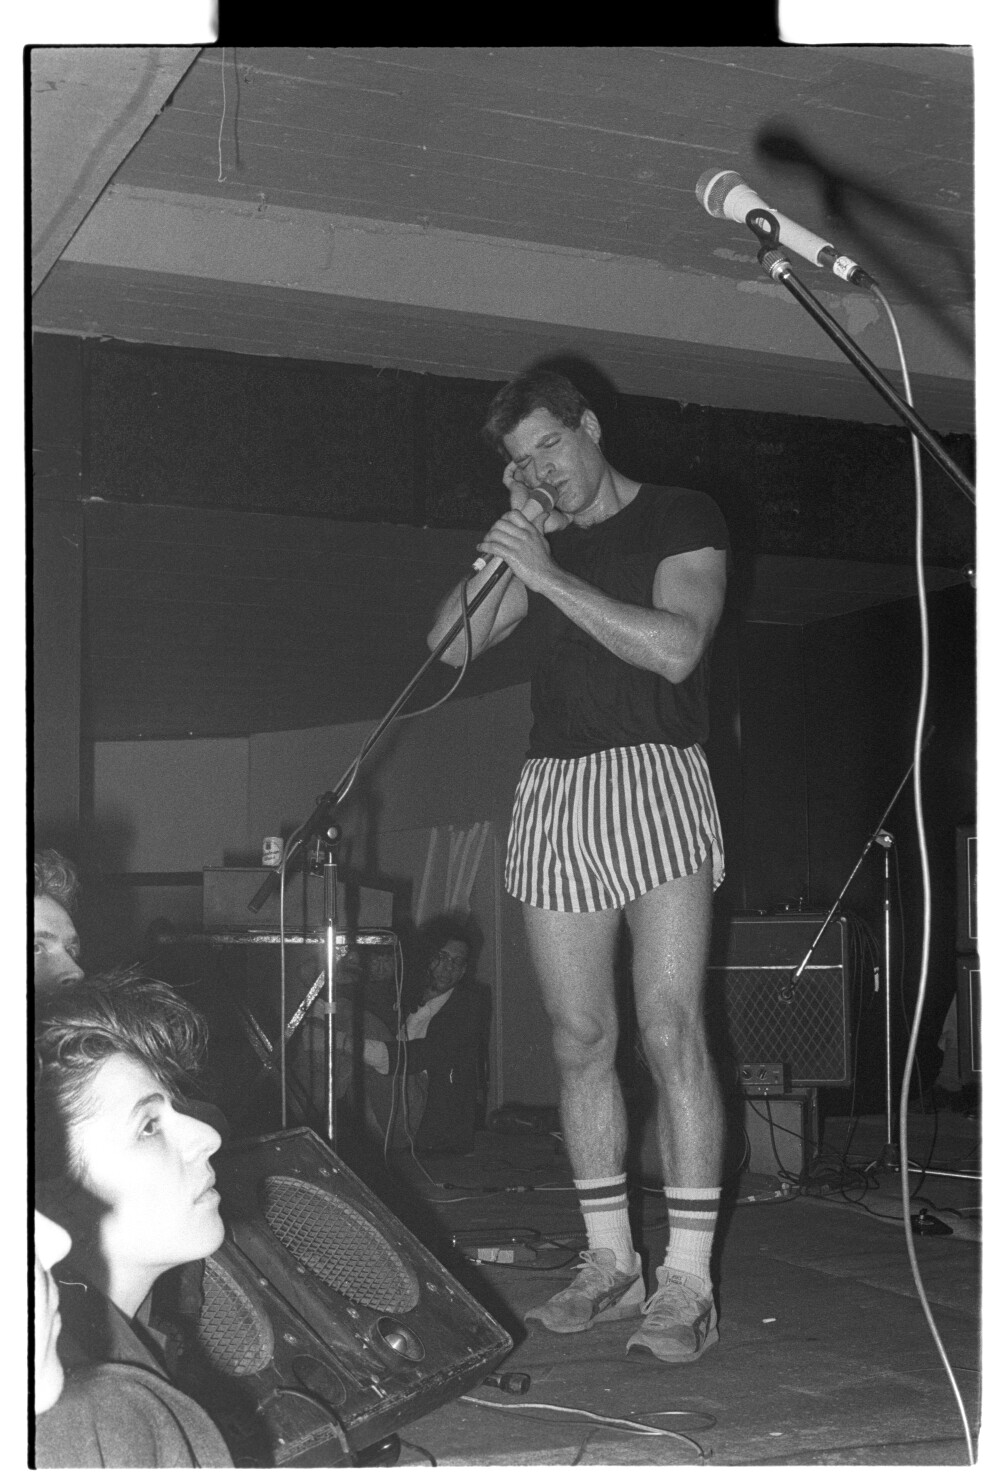 The Beauty Contest + Trigger and the Thrill Kings 15.6.1984 I N5 (Rita Maier / Schwules Museum Berlin RR-P)